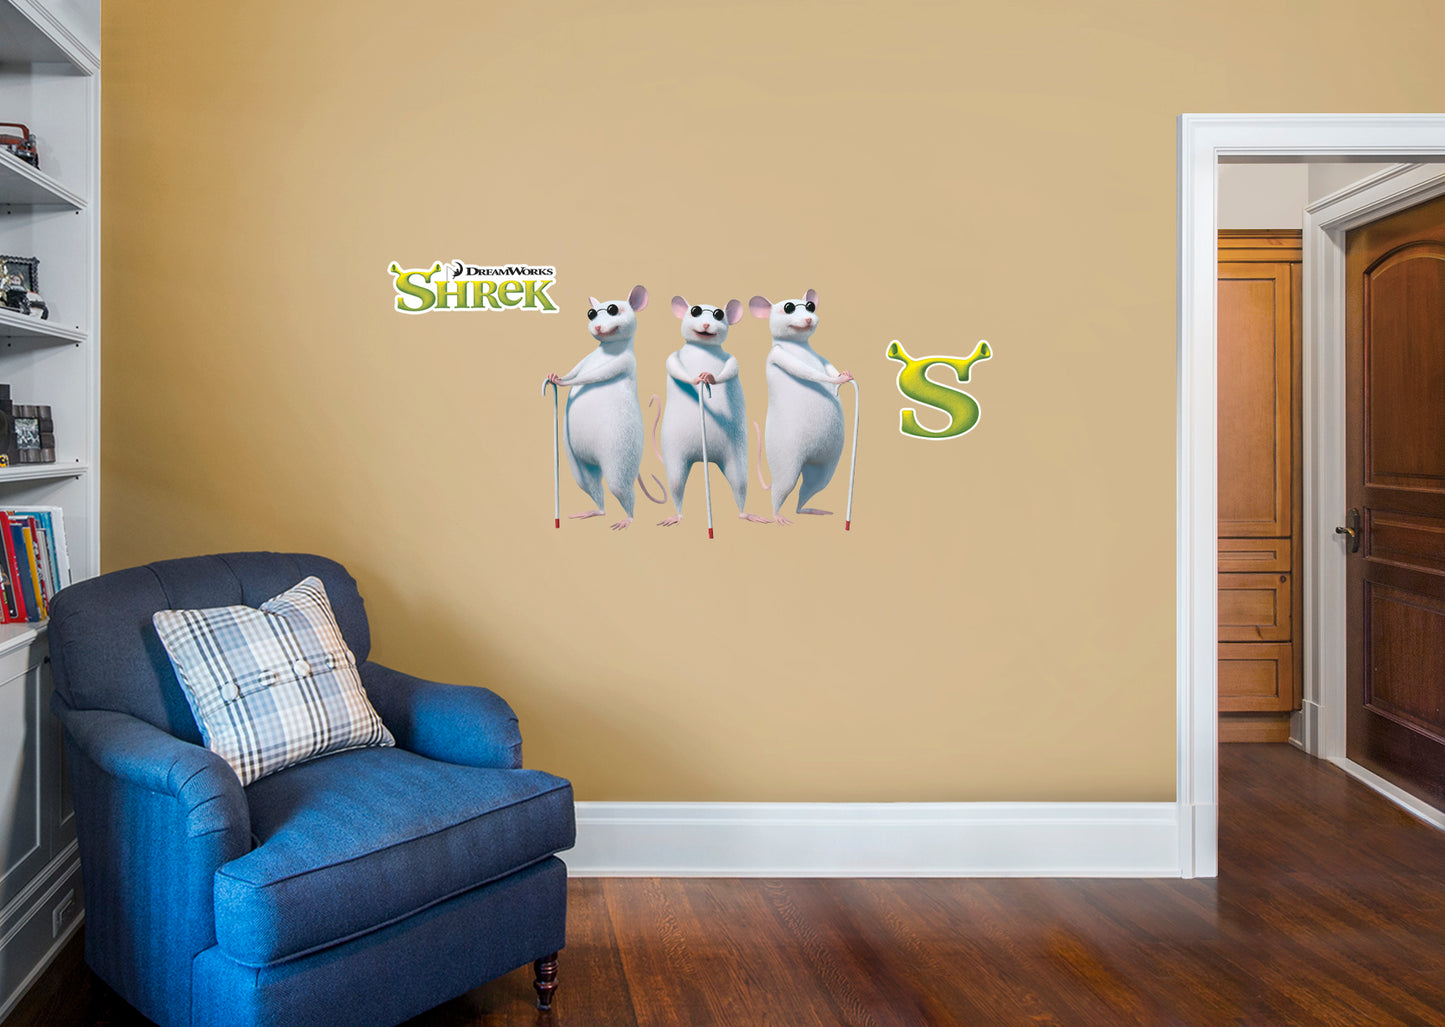 Shrek: Mice RealBig - Officially Licensed NBC Universal Removable Adhesive Decal